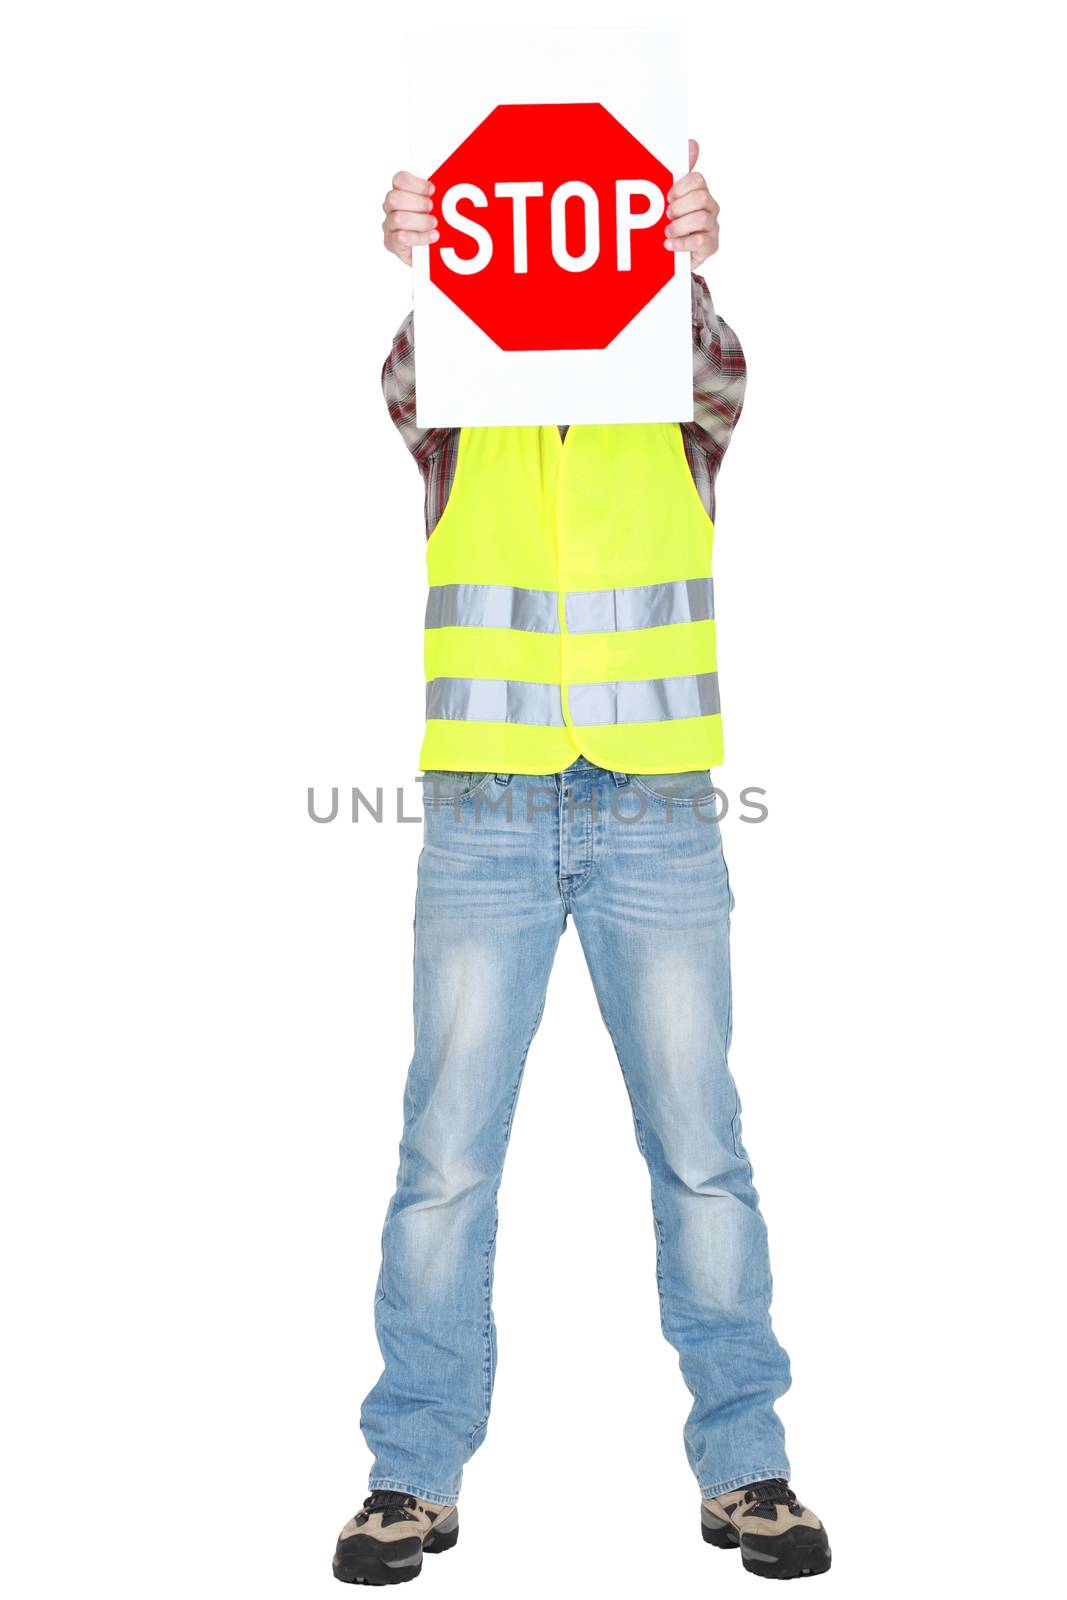 Builder covering face with stop sign